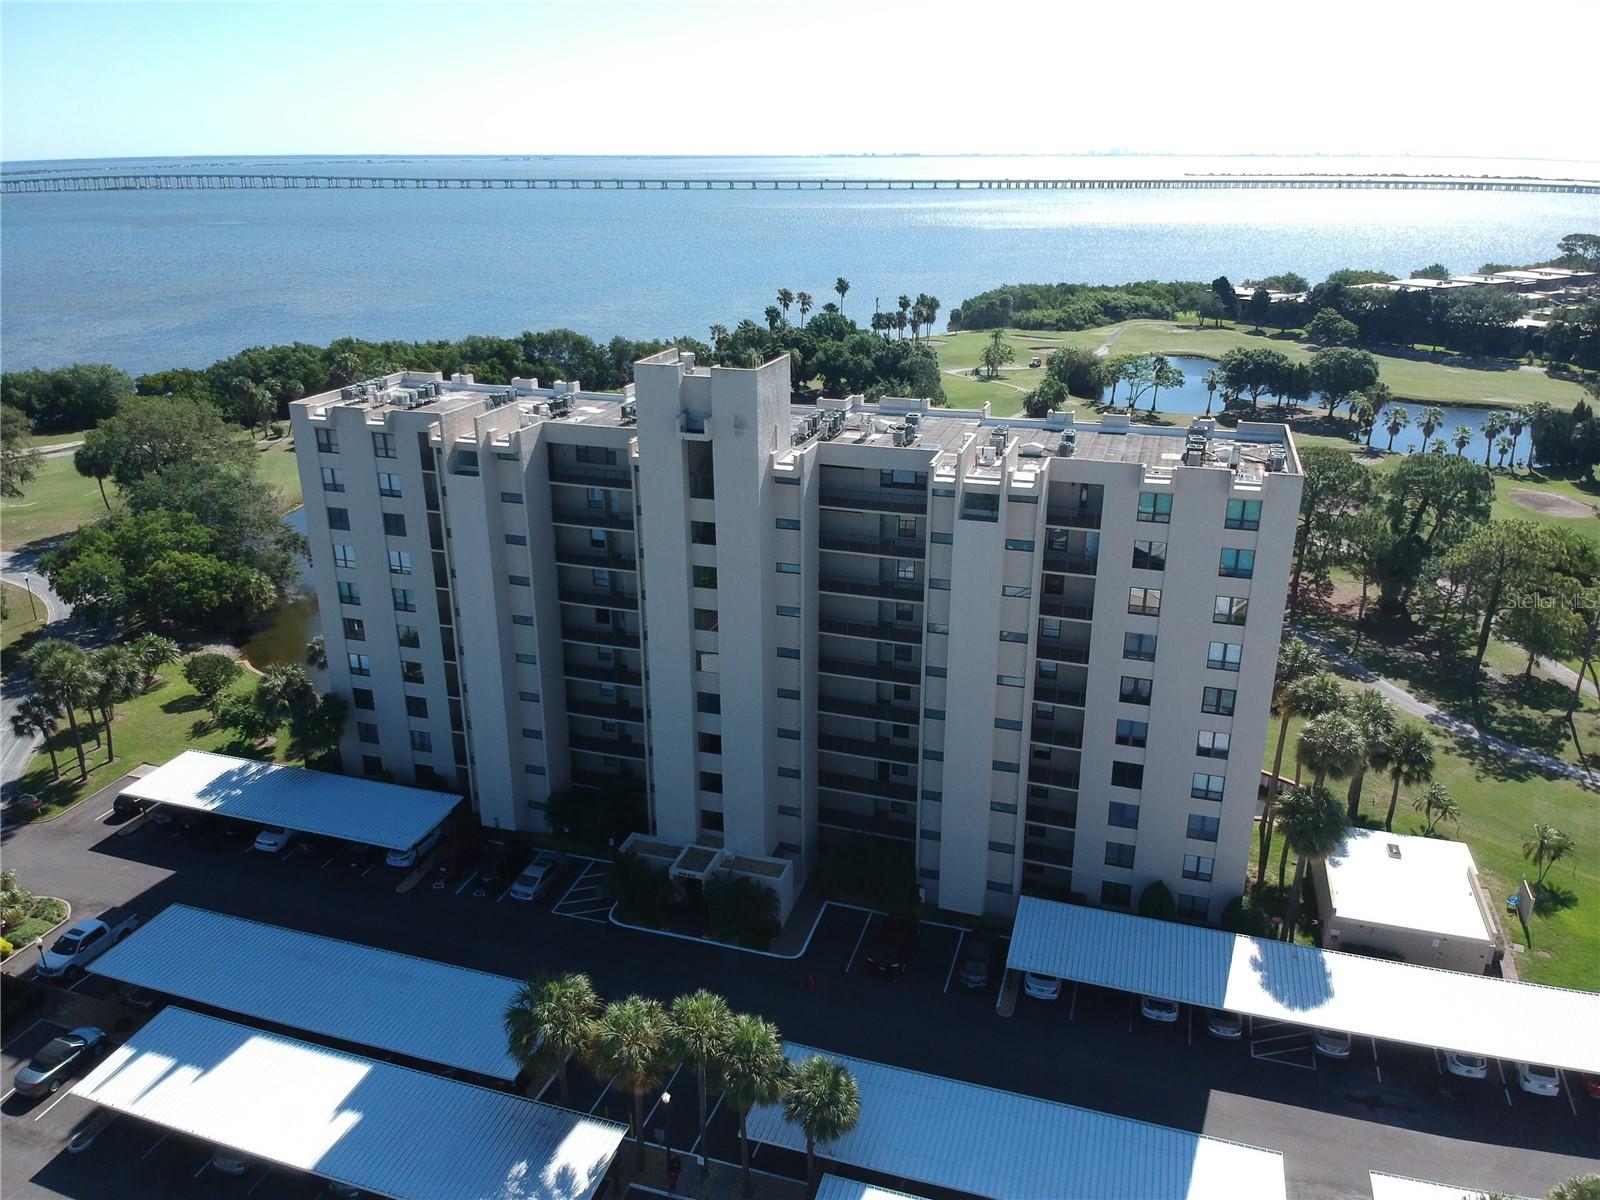 View CLEARWATER, FL 33760 condo